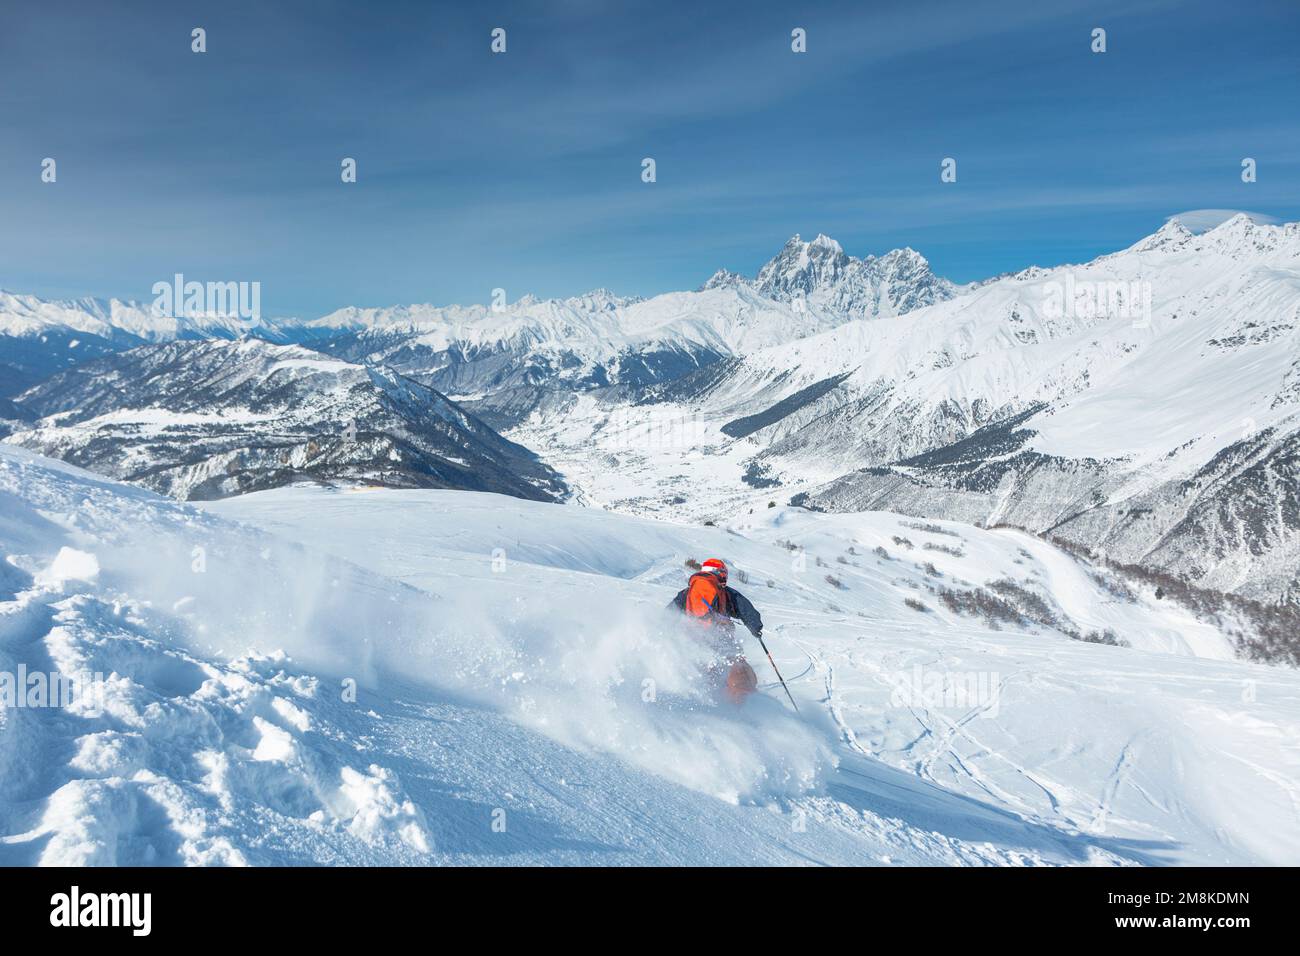 A skier is freeriding against the background of the peaks of Mount Ushba, the Great Caucasian Range in winter, Stock Photo